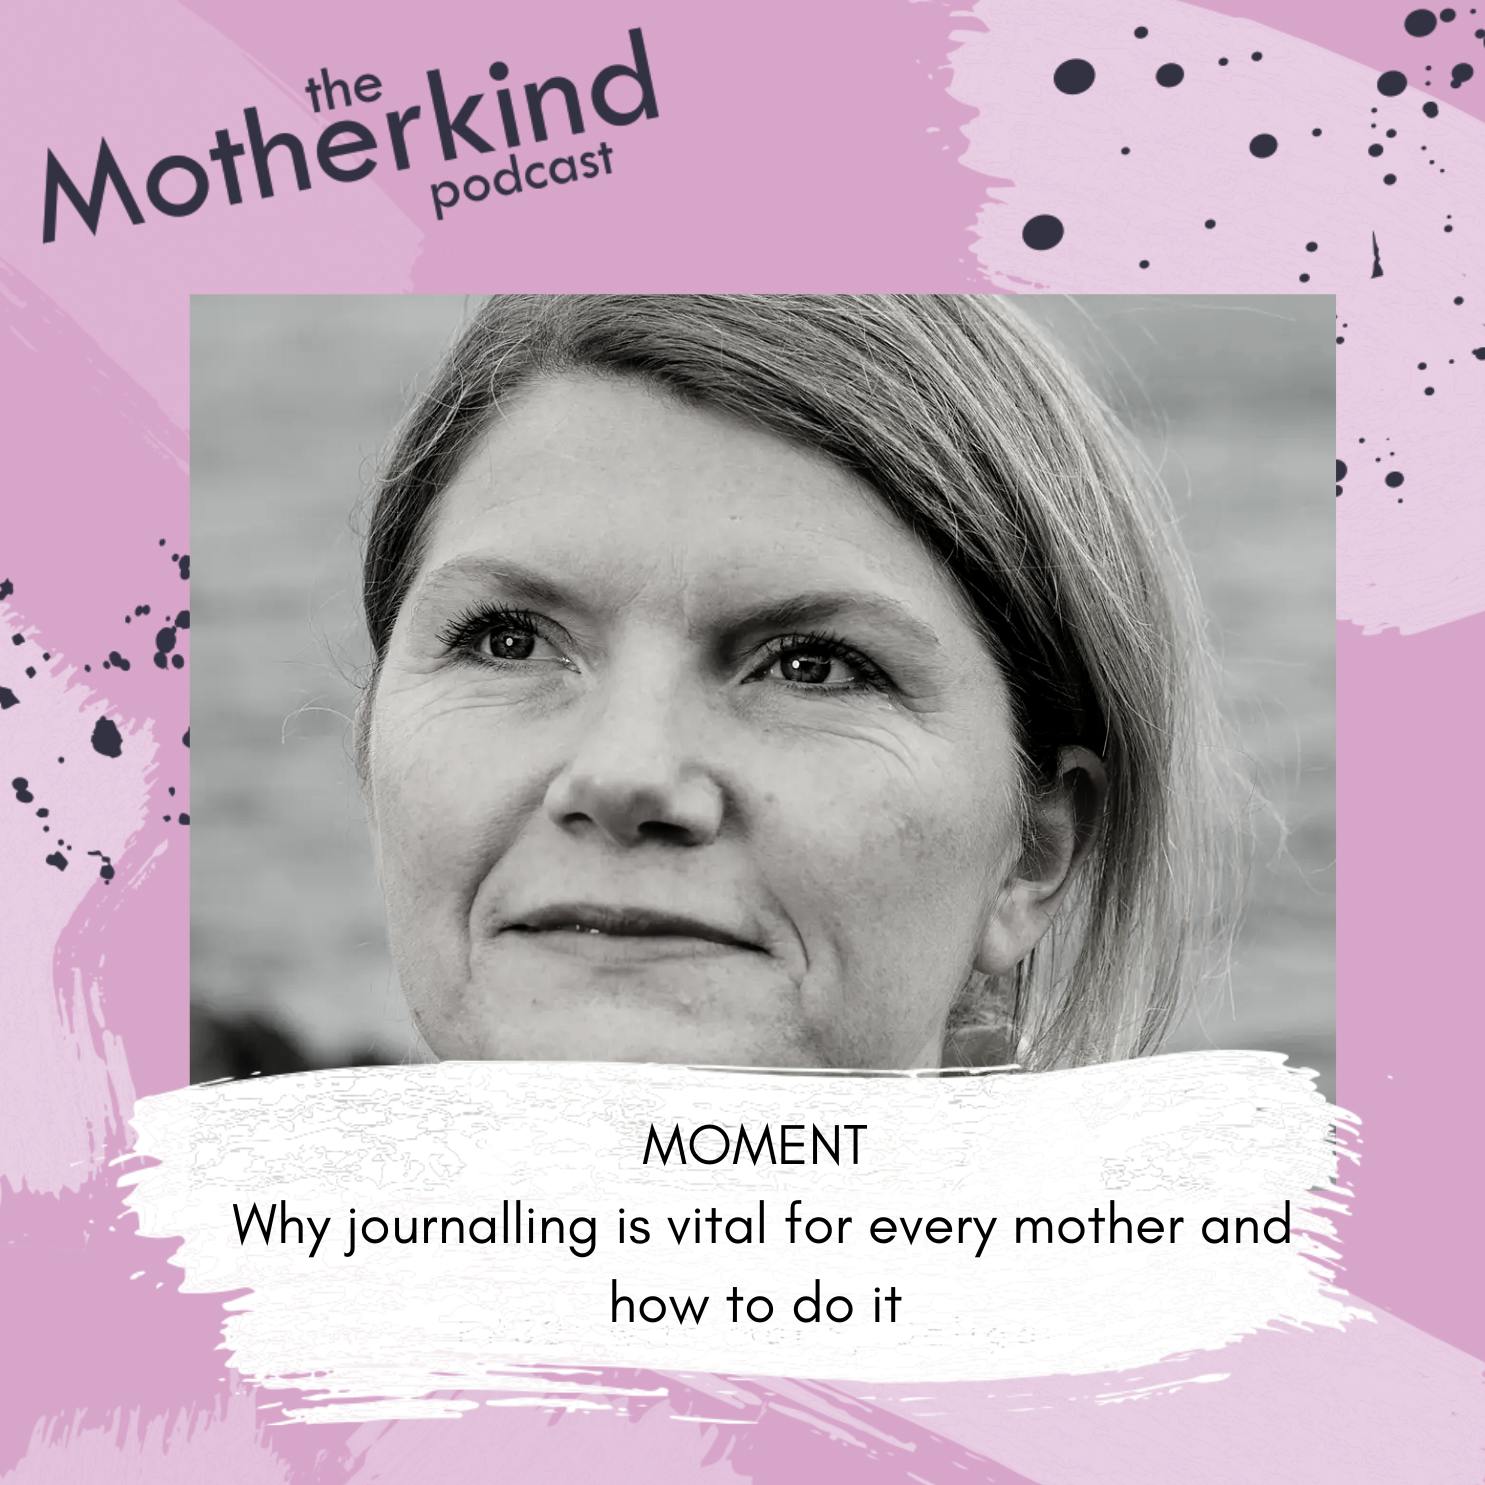 MOMENT | Why journalling is vital for every mother and how to do it with Cathy Rentzenbrink